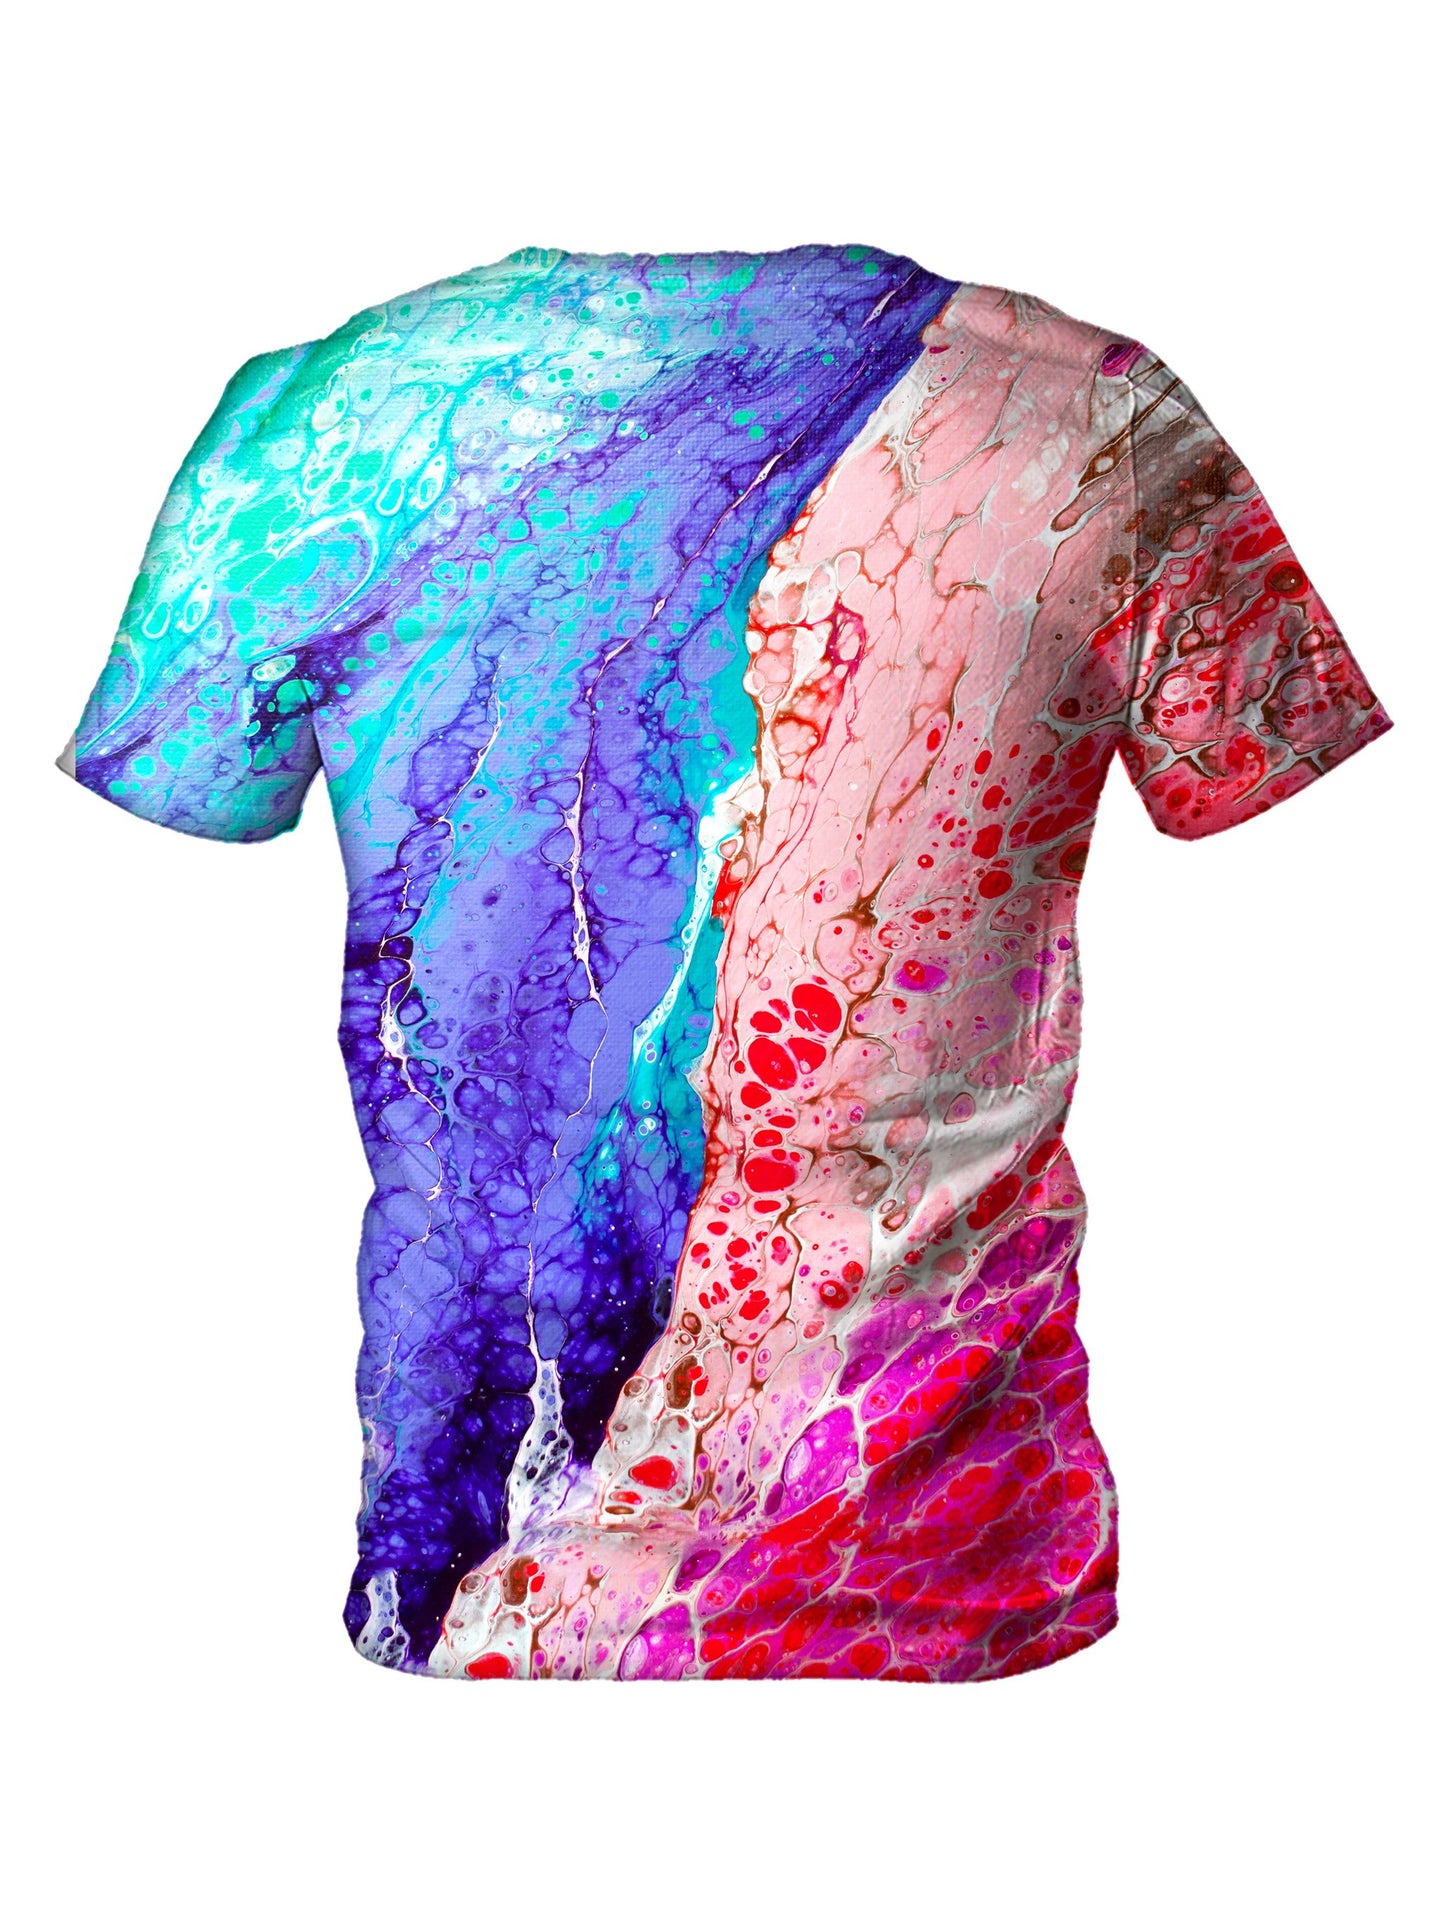 Back view of all over print psychedelic marbled paint t shirt by Gratefully Dyed Apparel. 